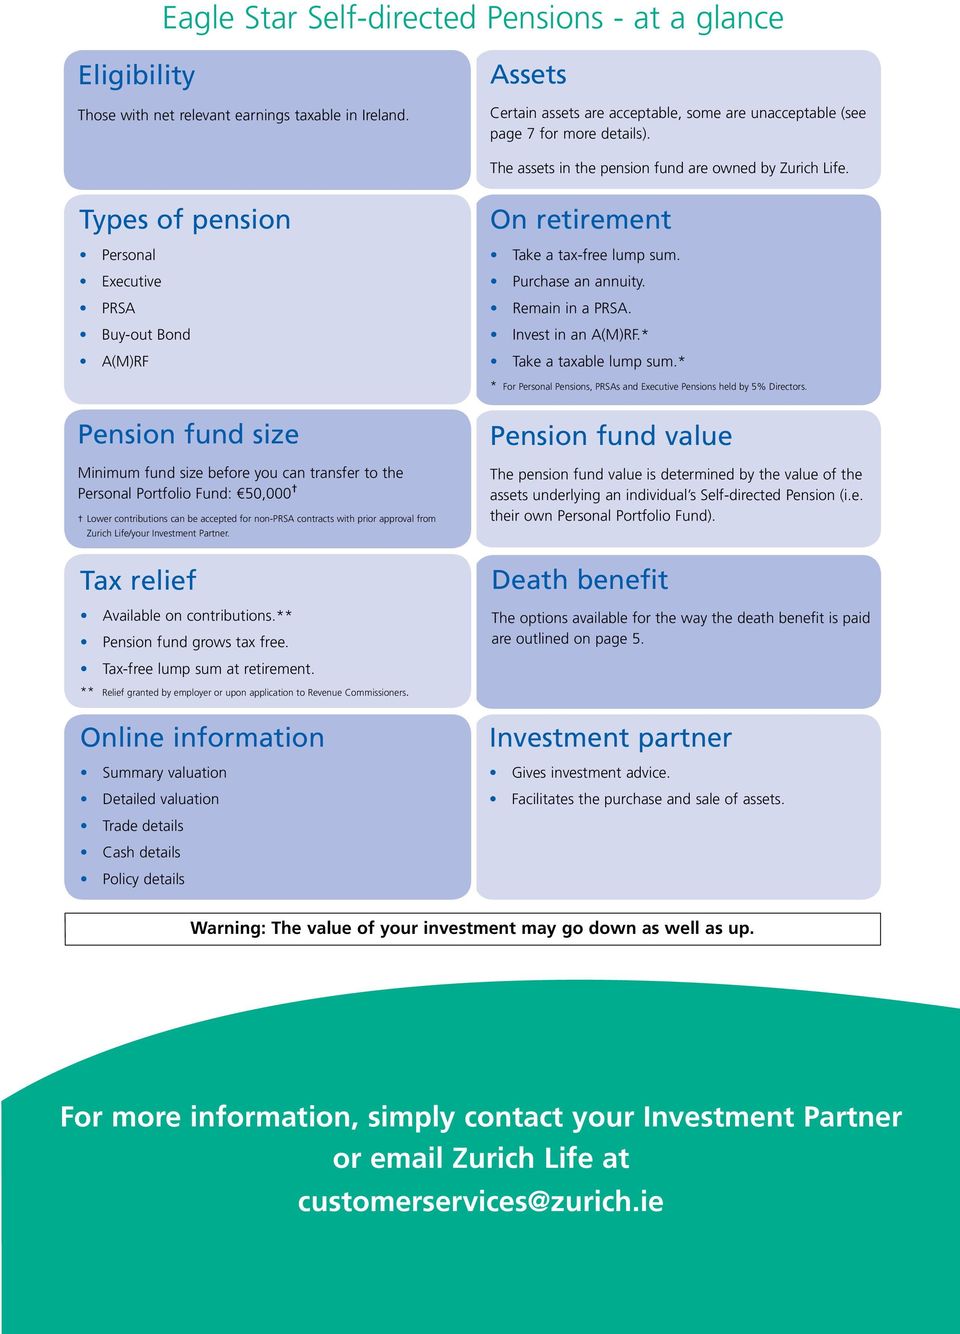 Types of pension Personal Executive PRSA Buy-out Bond A(M)RF On retirement Take a tax-free lump sum. Purchase an annuity. Remain in a PRSA. Invest in an A(M)RF.* Take a taxable lump sum.